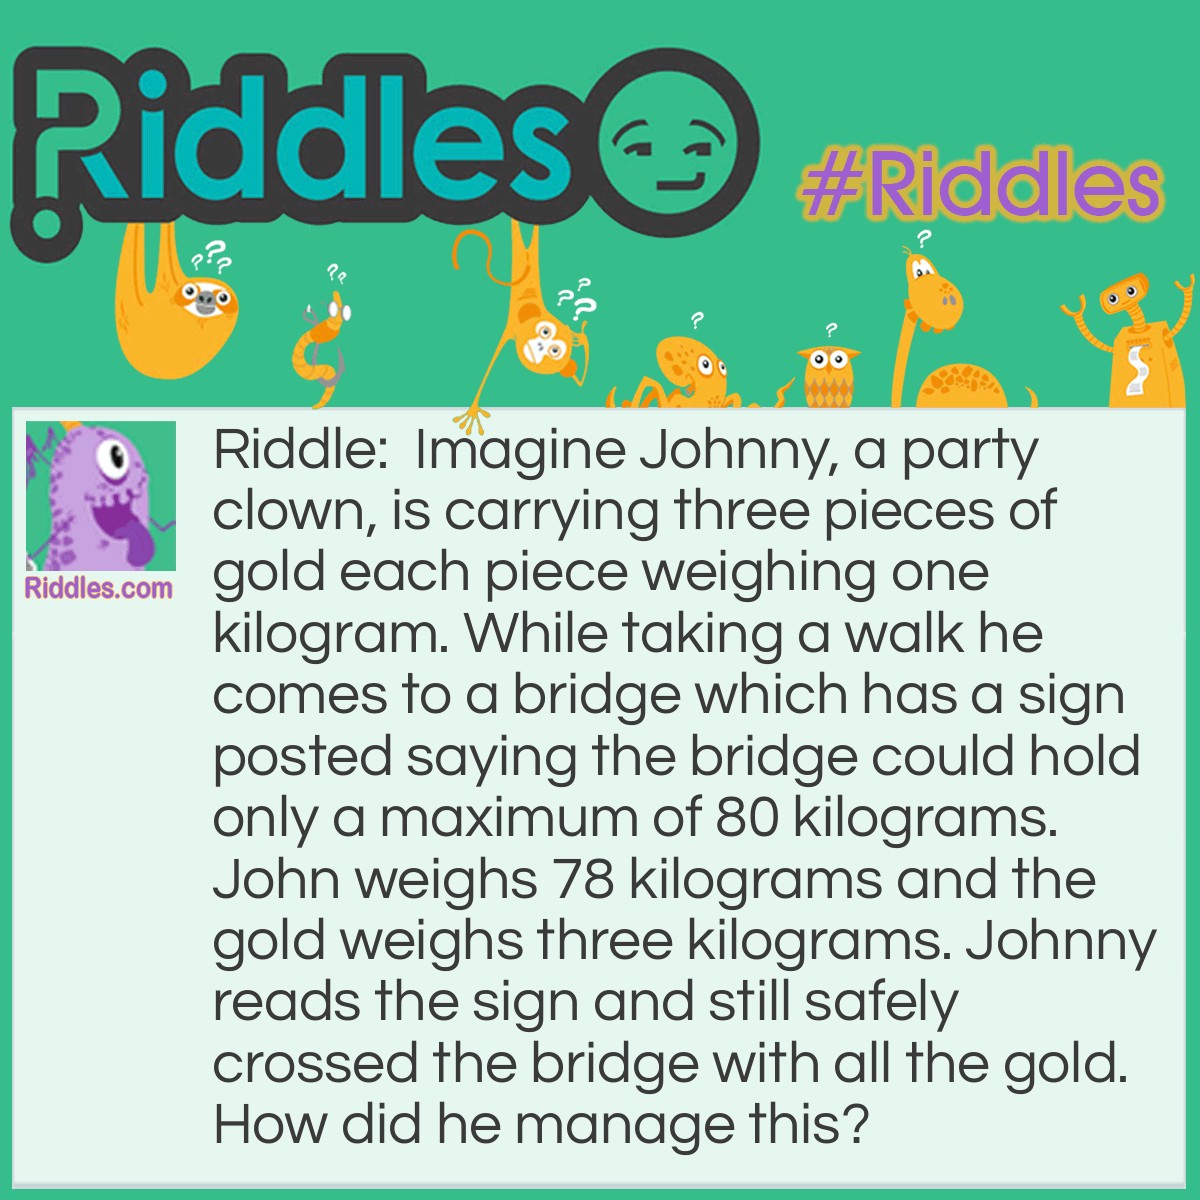 Riddle: Imagine Johnny, a party clown, is carrying three pieces of gold each piece weighing one kilogram. While taking a walk he comes to a bridge which has a sign posted saying the bridge could hold only a maximum of 80 kilograms. John weighs 78 kilograms and the gold weighs three kilograms. Johnny reads the sign and still safely crossed the bridge with all the gold. How did he manage this? Answer: Johnny is a clown so he has mastered juggling. When he came to the bridge he juggled the gold, always keeping one piece in the air.